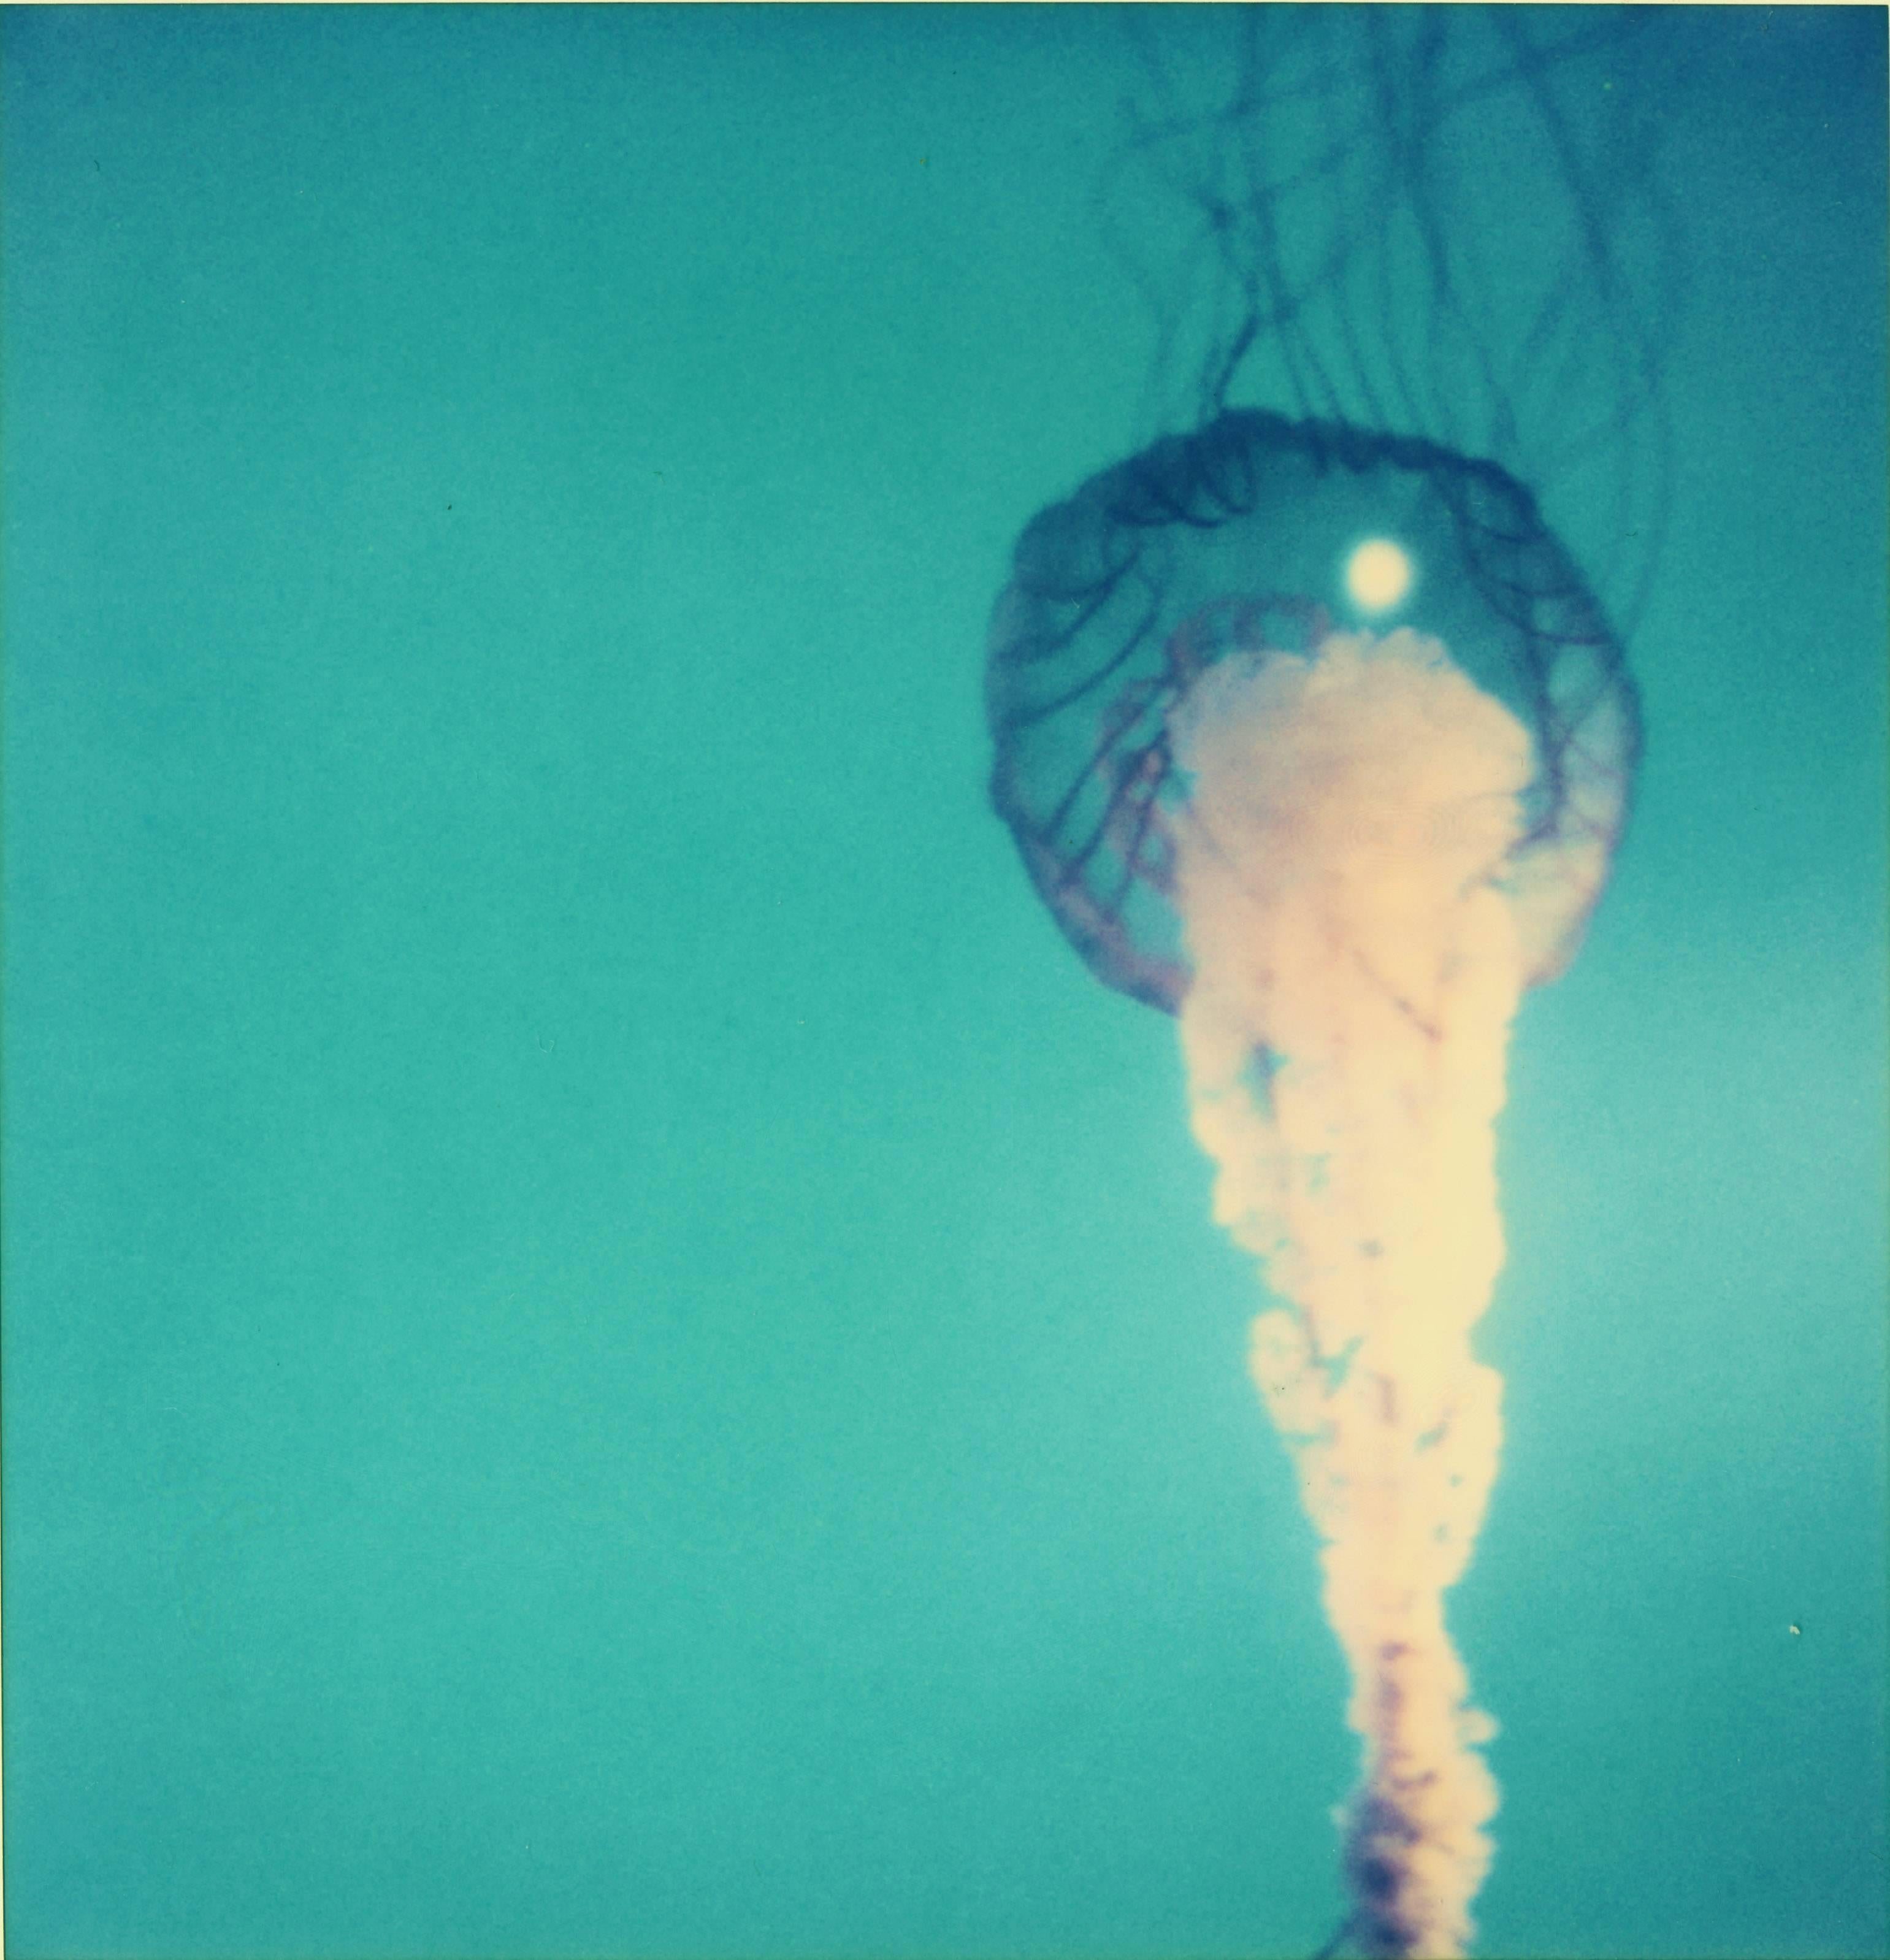 Stefanie Schneider Still-Life Photograph - Jelly Fish - Contemporary, Expired, Polaroid, Photograph, Abstract, Color